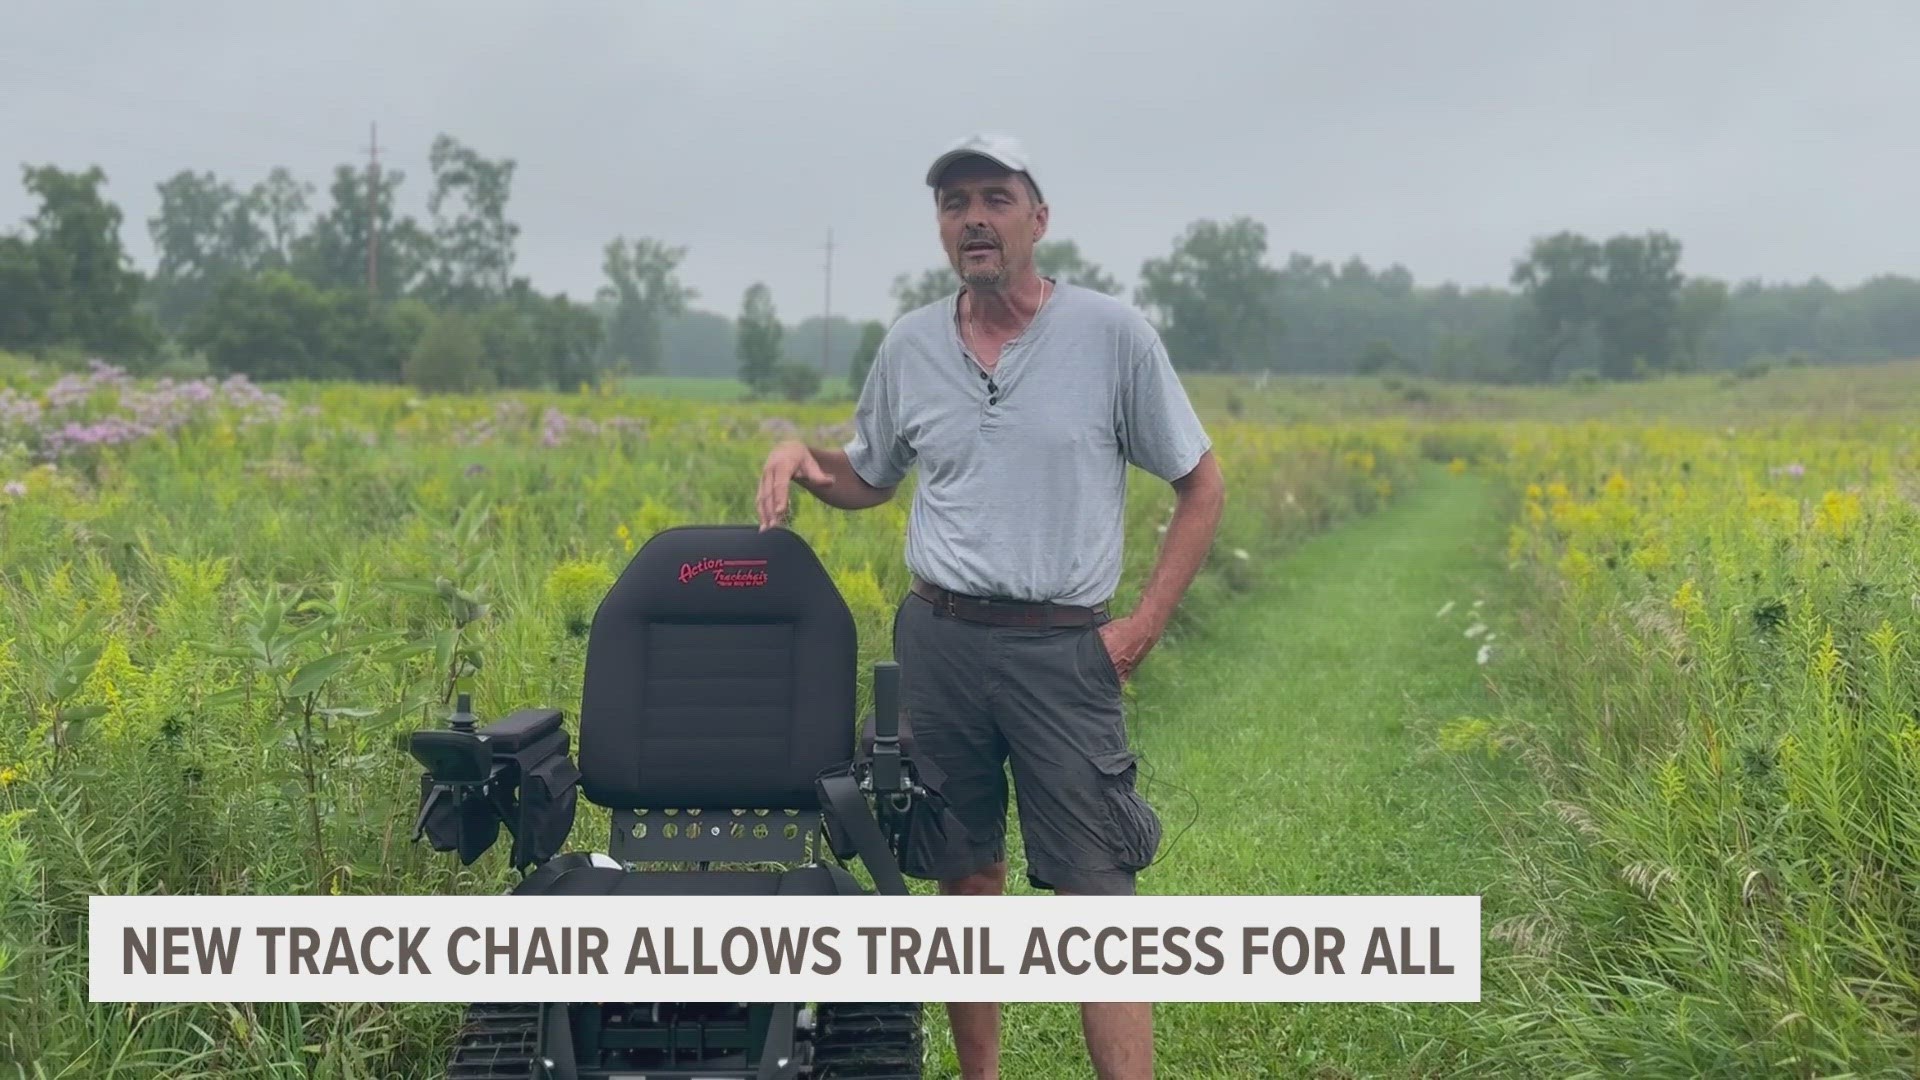 For those with limited mobility, navigating some nature trails can be a challenge.